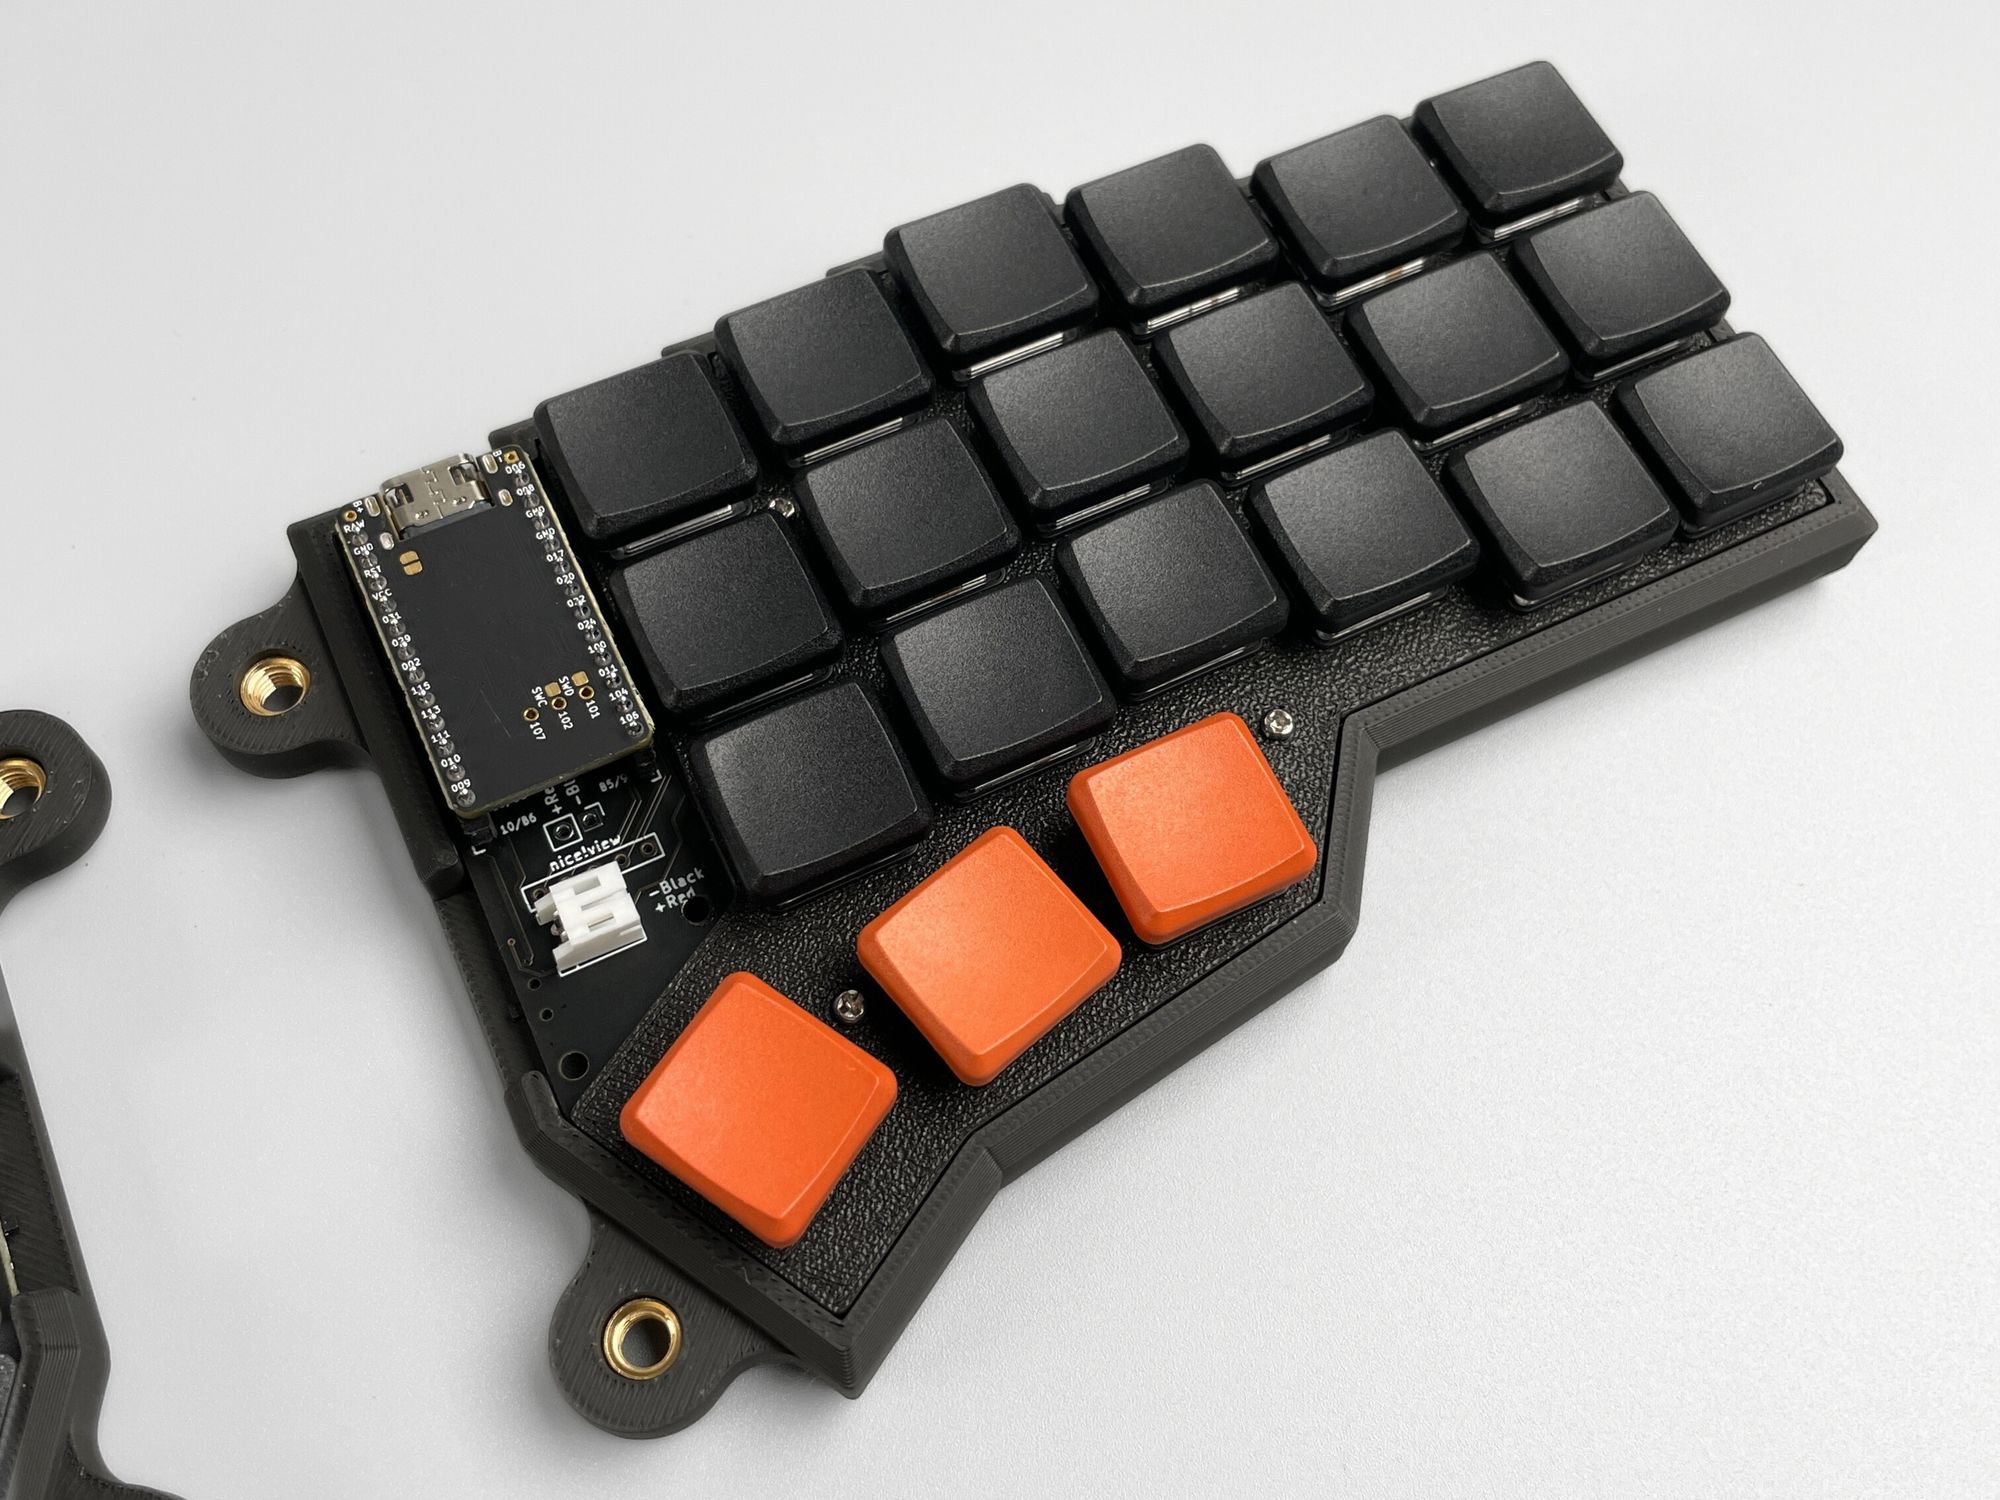 Wireless Corne with Low Profile Choc v1 Key Switches and MBK Keycaps